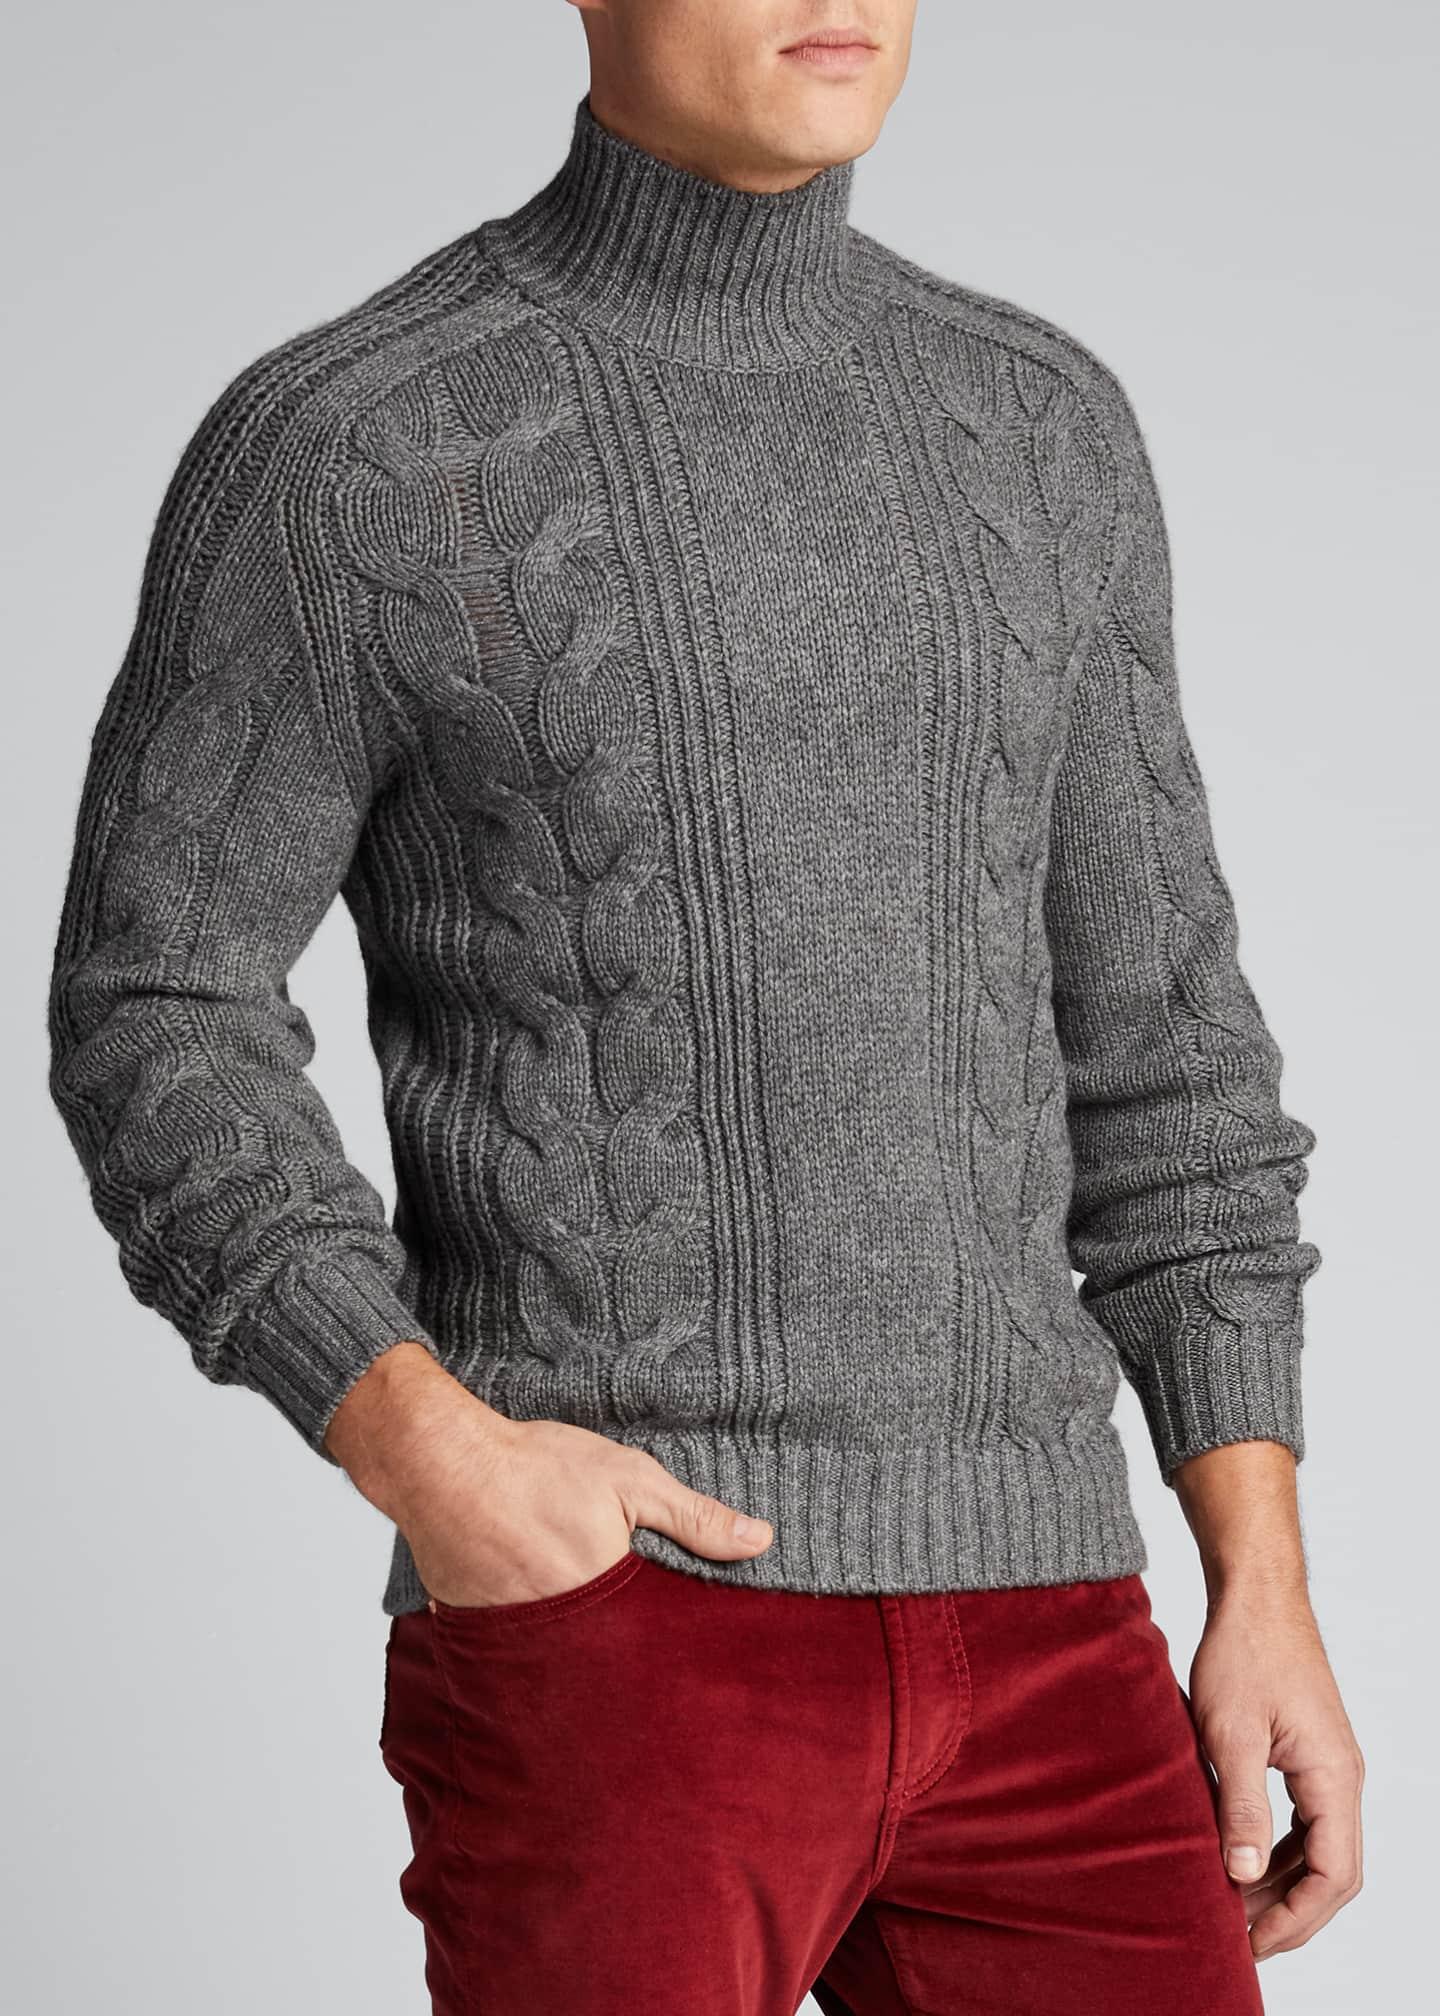 Vince Wool Men's Solid Cable-knit Turtleneck Sweater in Gray for Men - Lyst